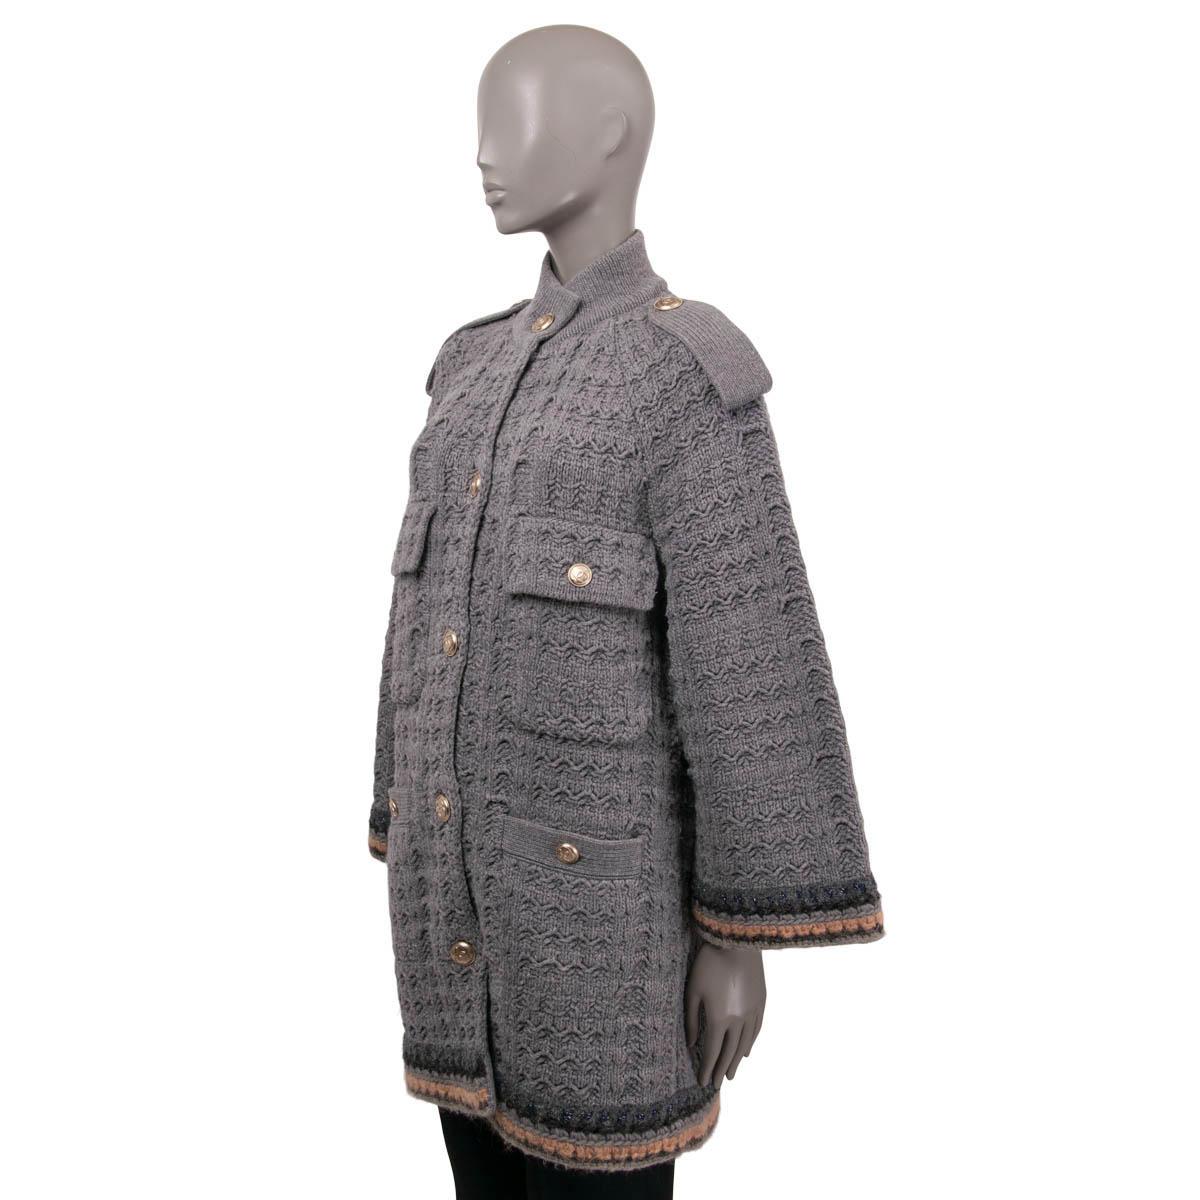 100% authentic Chanel oversized chunky knit coat in grey wool (90%) and cashmere (10%) with breaded trims in charcoal, nude, grey, navy and silver lurex. The design features wide 3/4 sleeves, a stand-up collar, two chest flap-pockets, two front